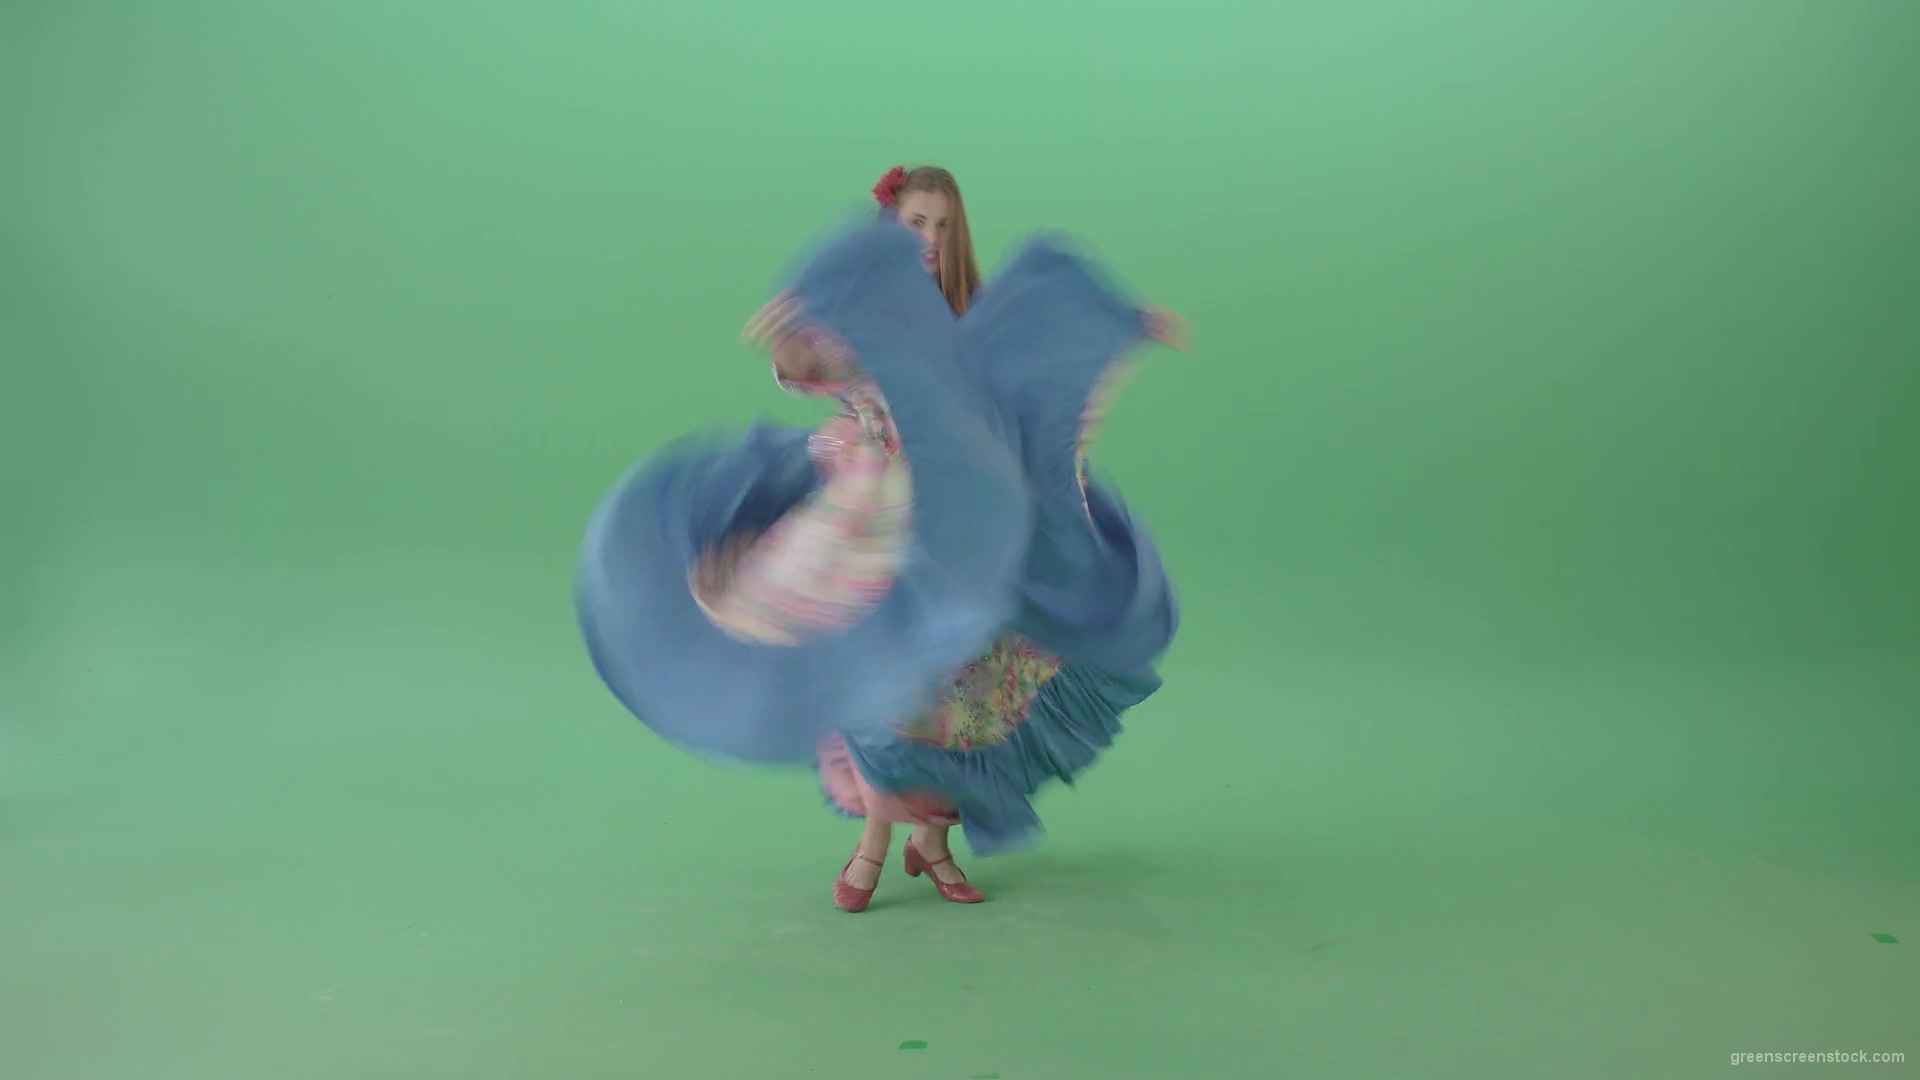 Balkan-roma-girl-waving-gypsy-dress-and-dancing-isolated-on-green-screen-4K-Video-Footage-1-1920_007 Green Screen Stock